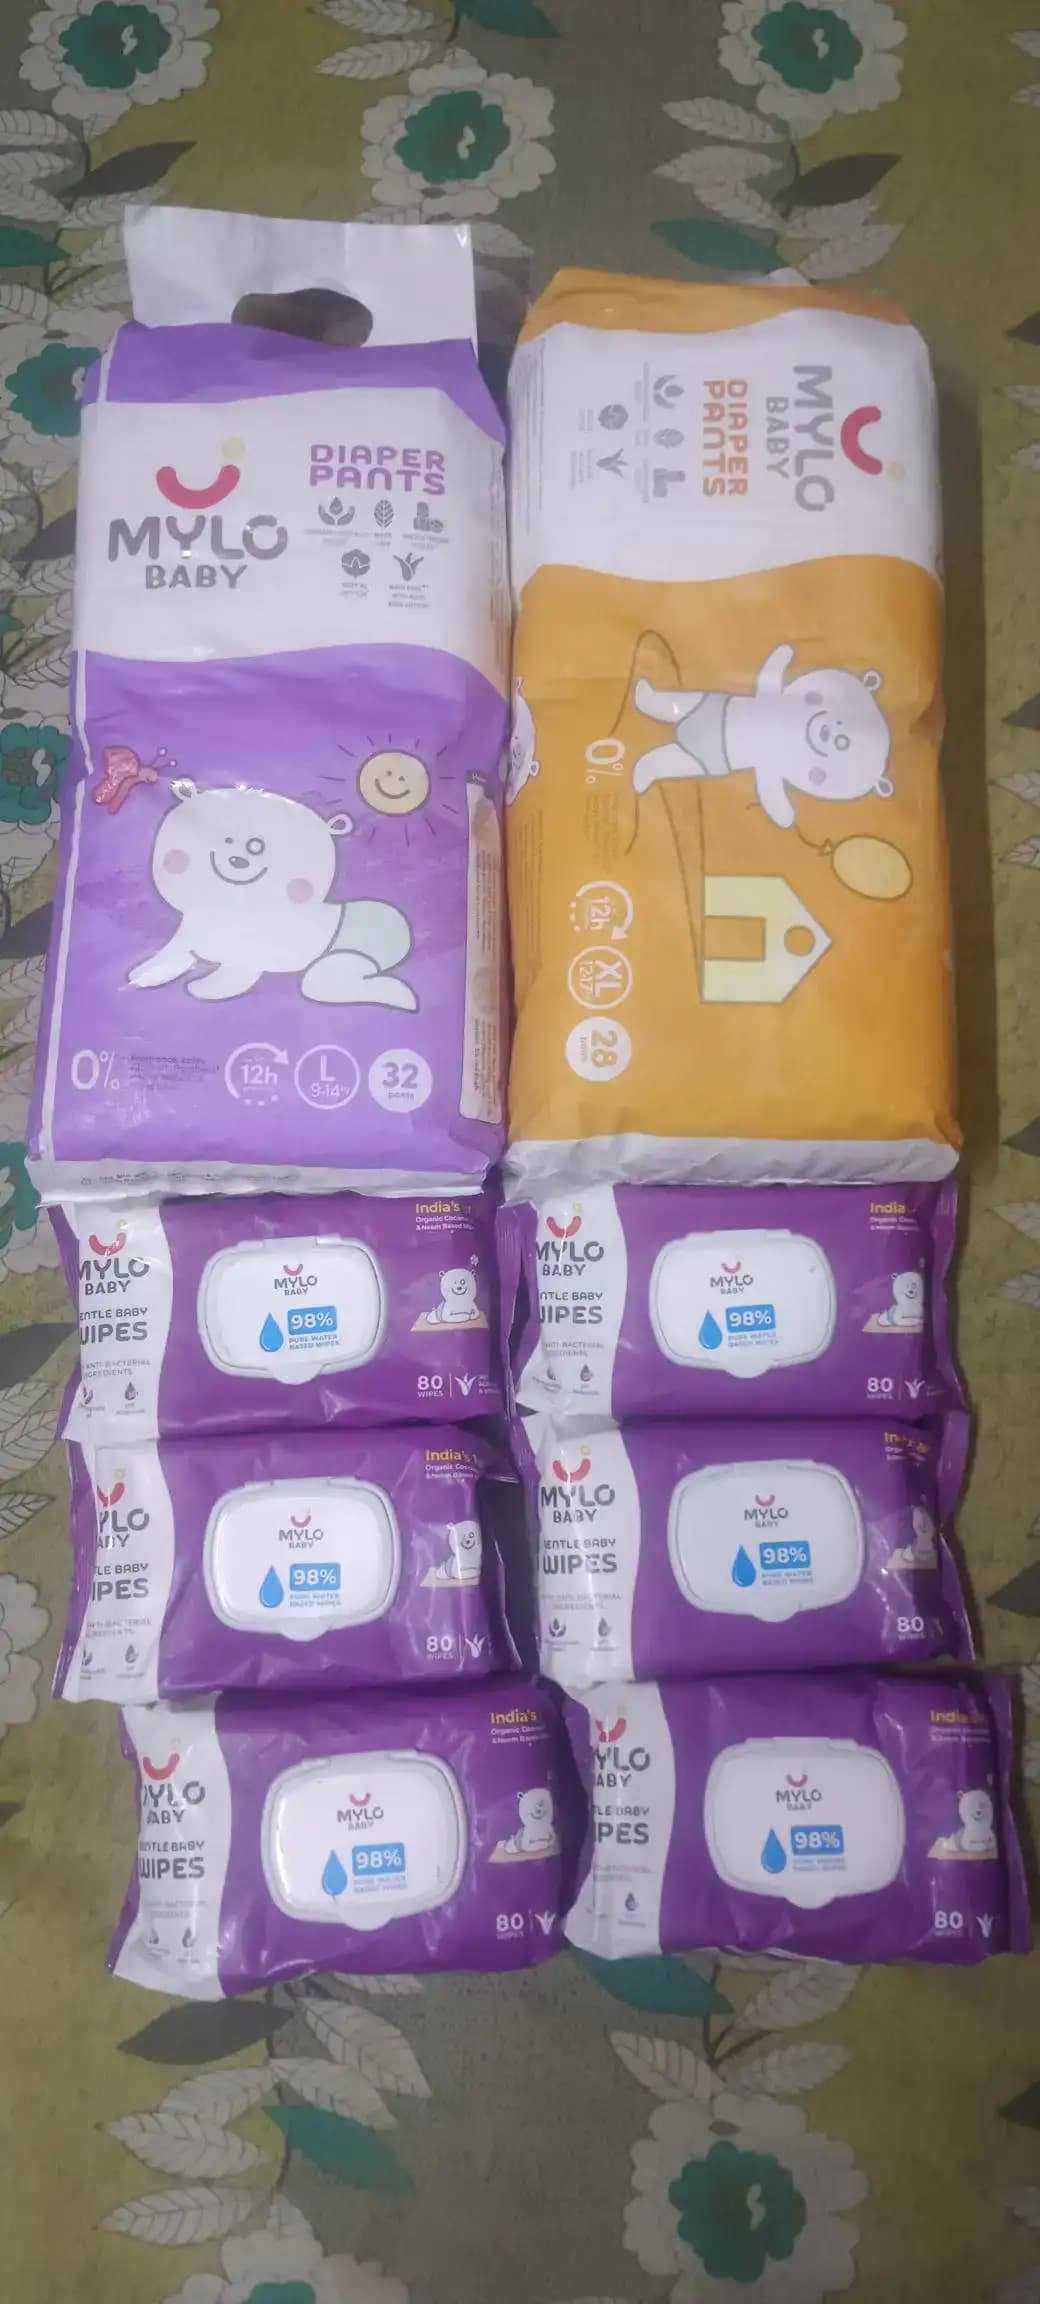 Mylo Baby New Born Tape Diapers | Up to 5Kgs | with Wetness Indicator & Magic Grip Tape | 28 Count - Pack of 3 